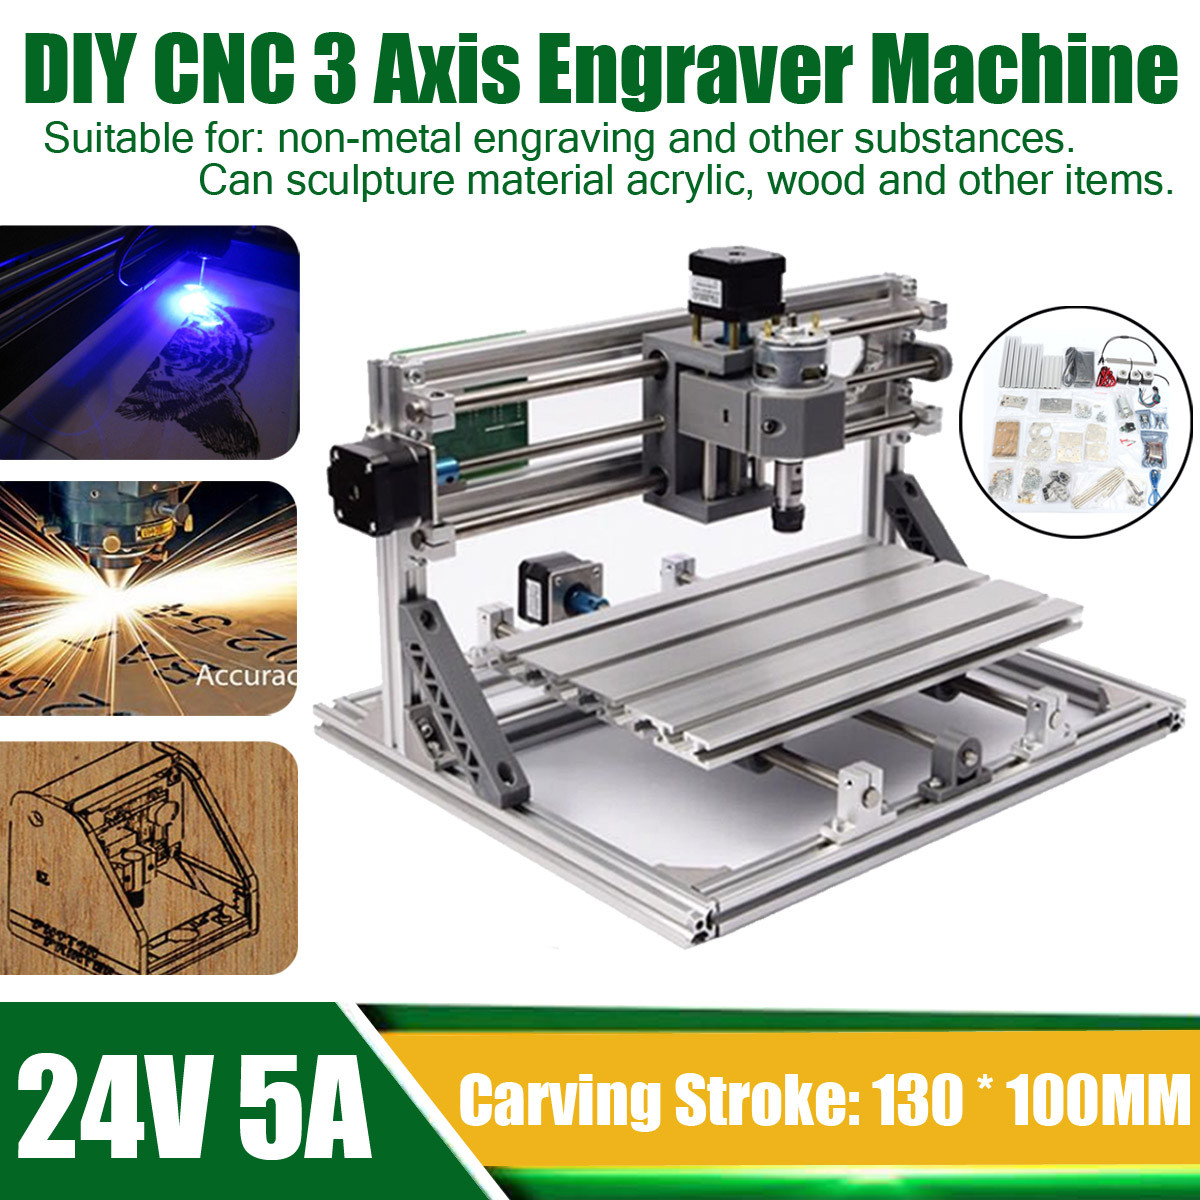 DIY Cnc 3 Axis Engraver Machine Pcb Milling Wood Carving Router Kit Arduino Grbl
 130 100 40mm DIY CNC 3 Axis Engraver Machine PCB